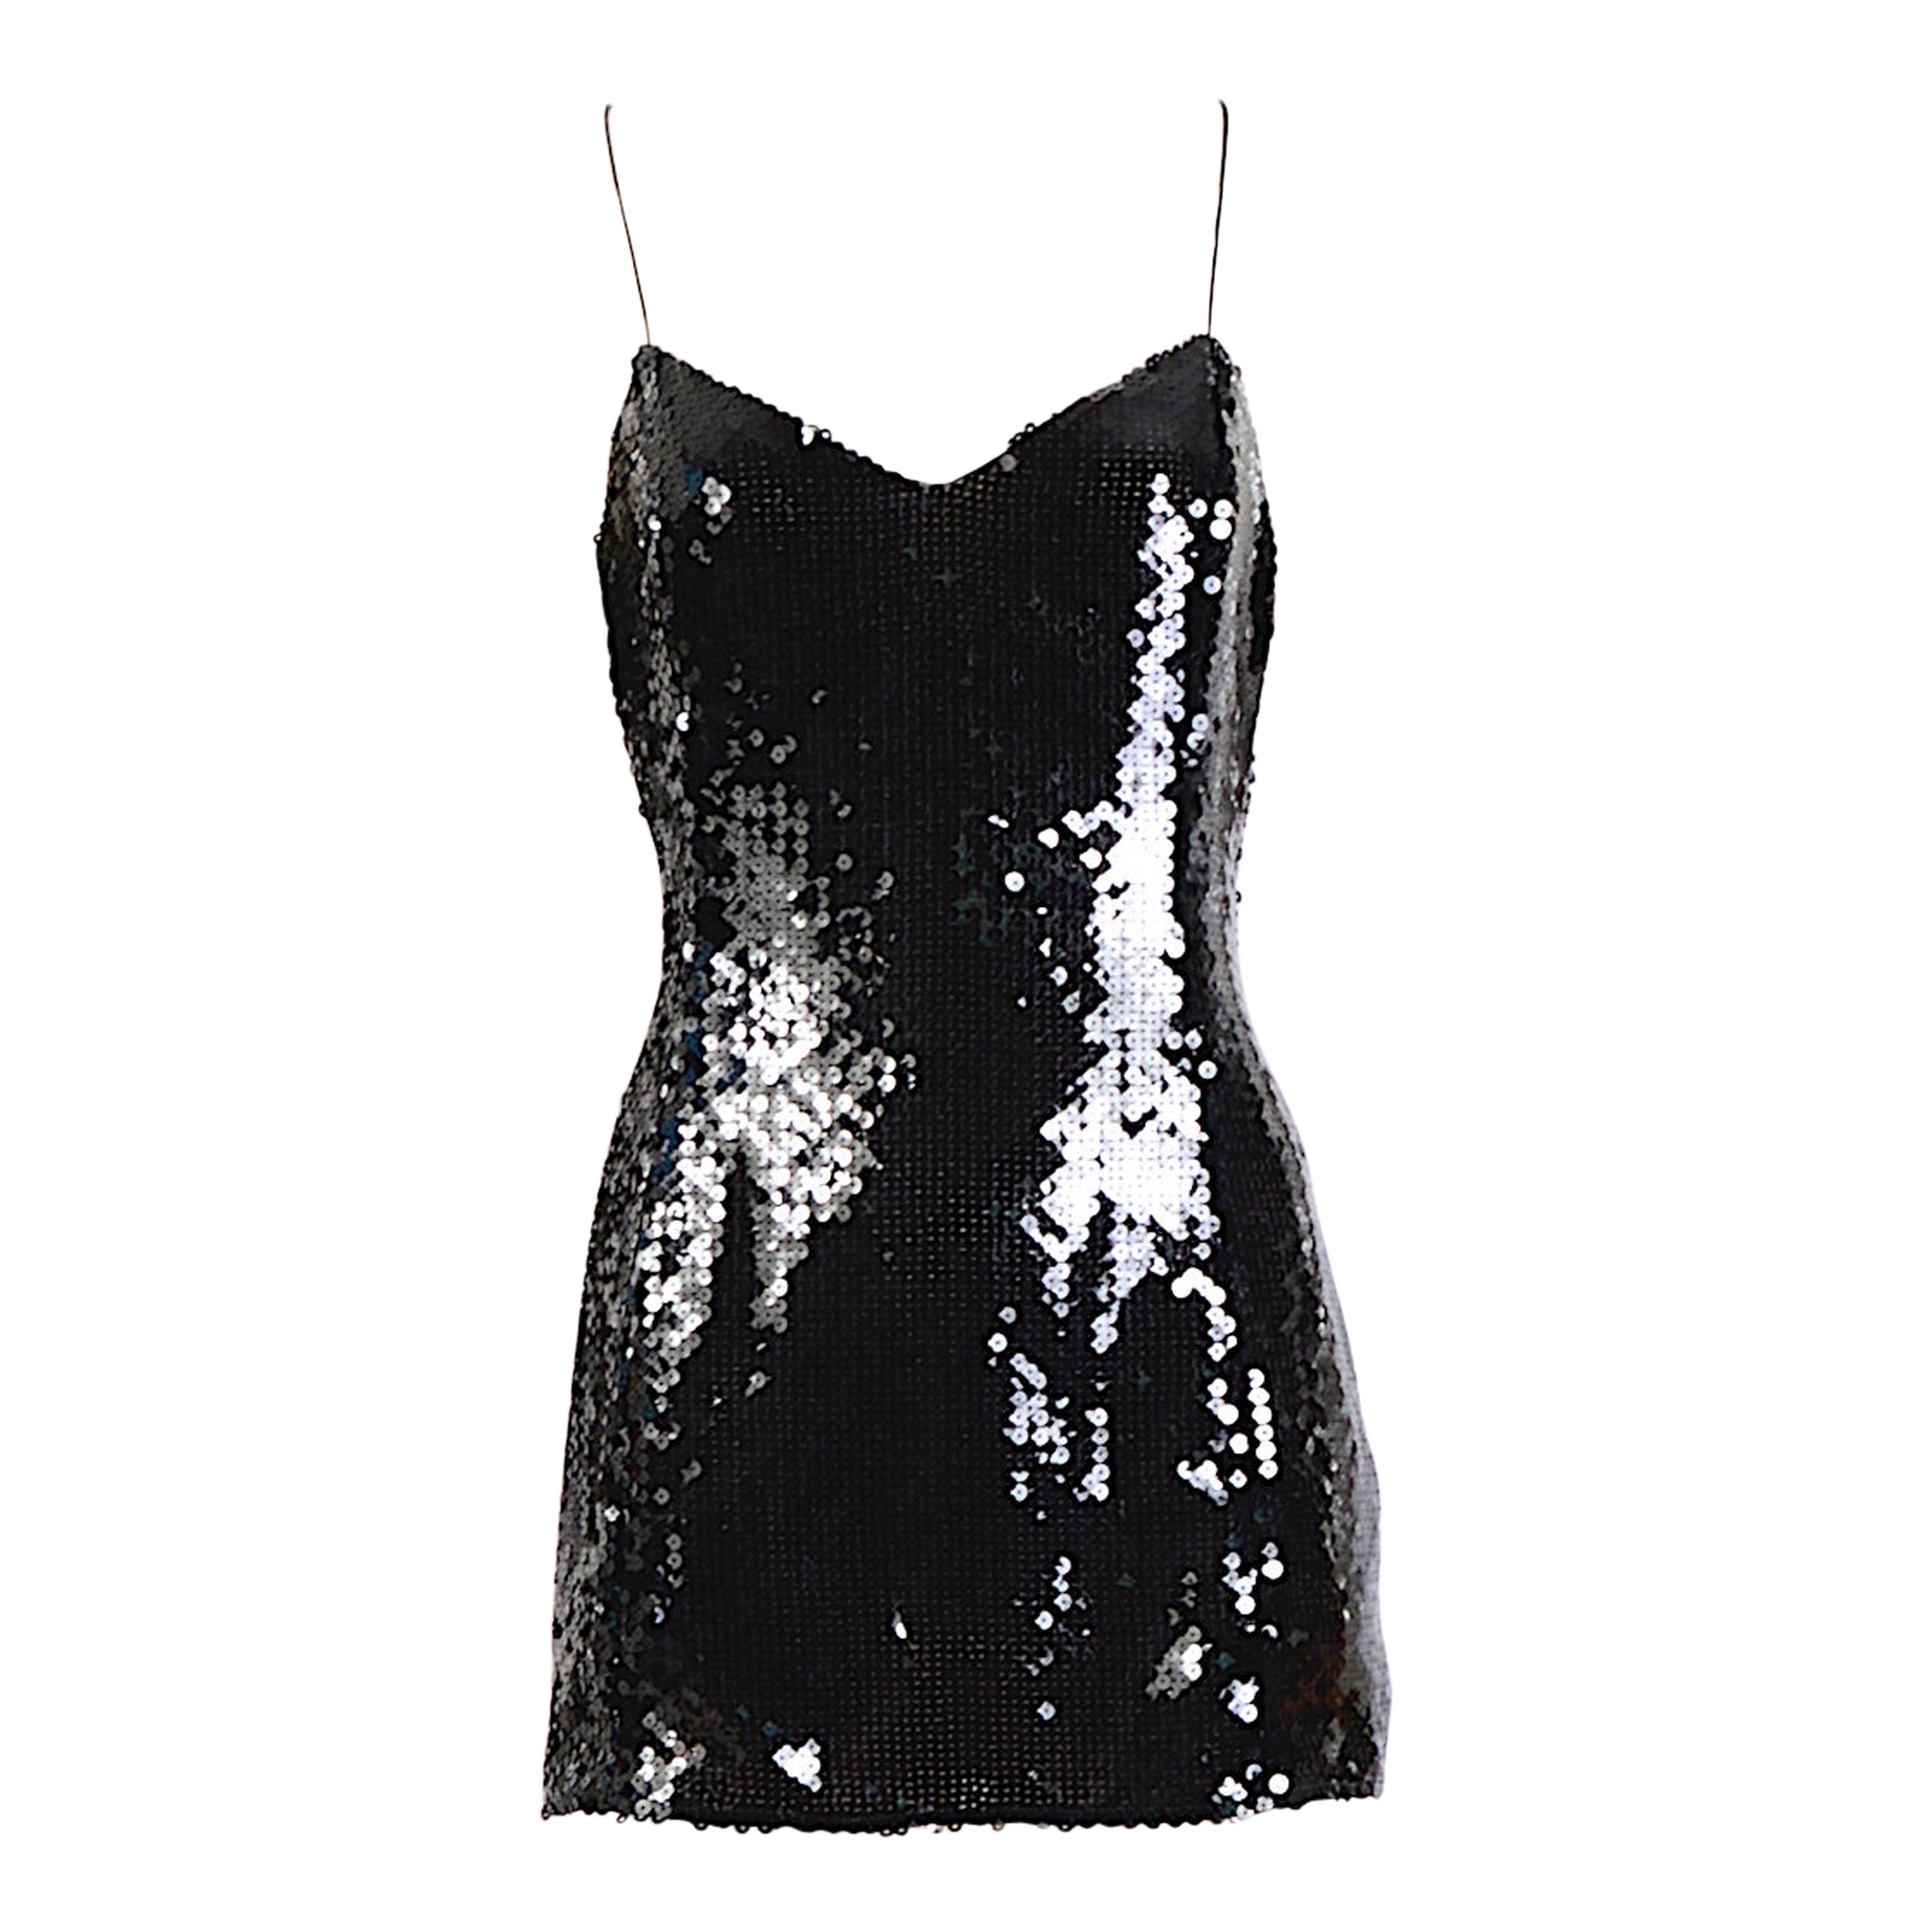 Thierry Mugler couture numbered black sequins spaghetti straps mini dress or top For Sale